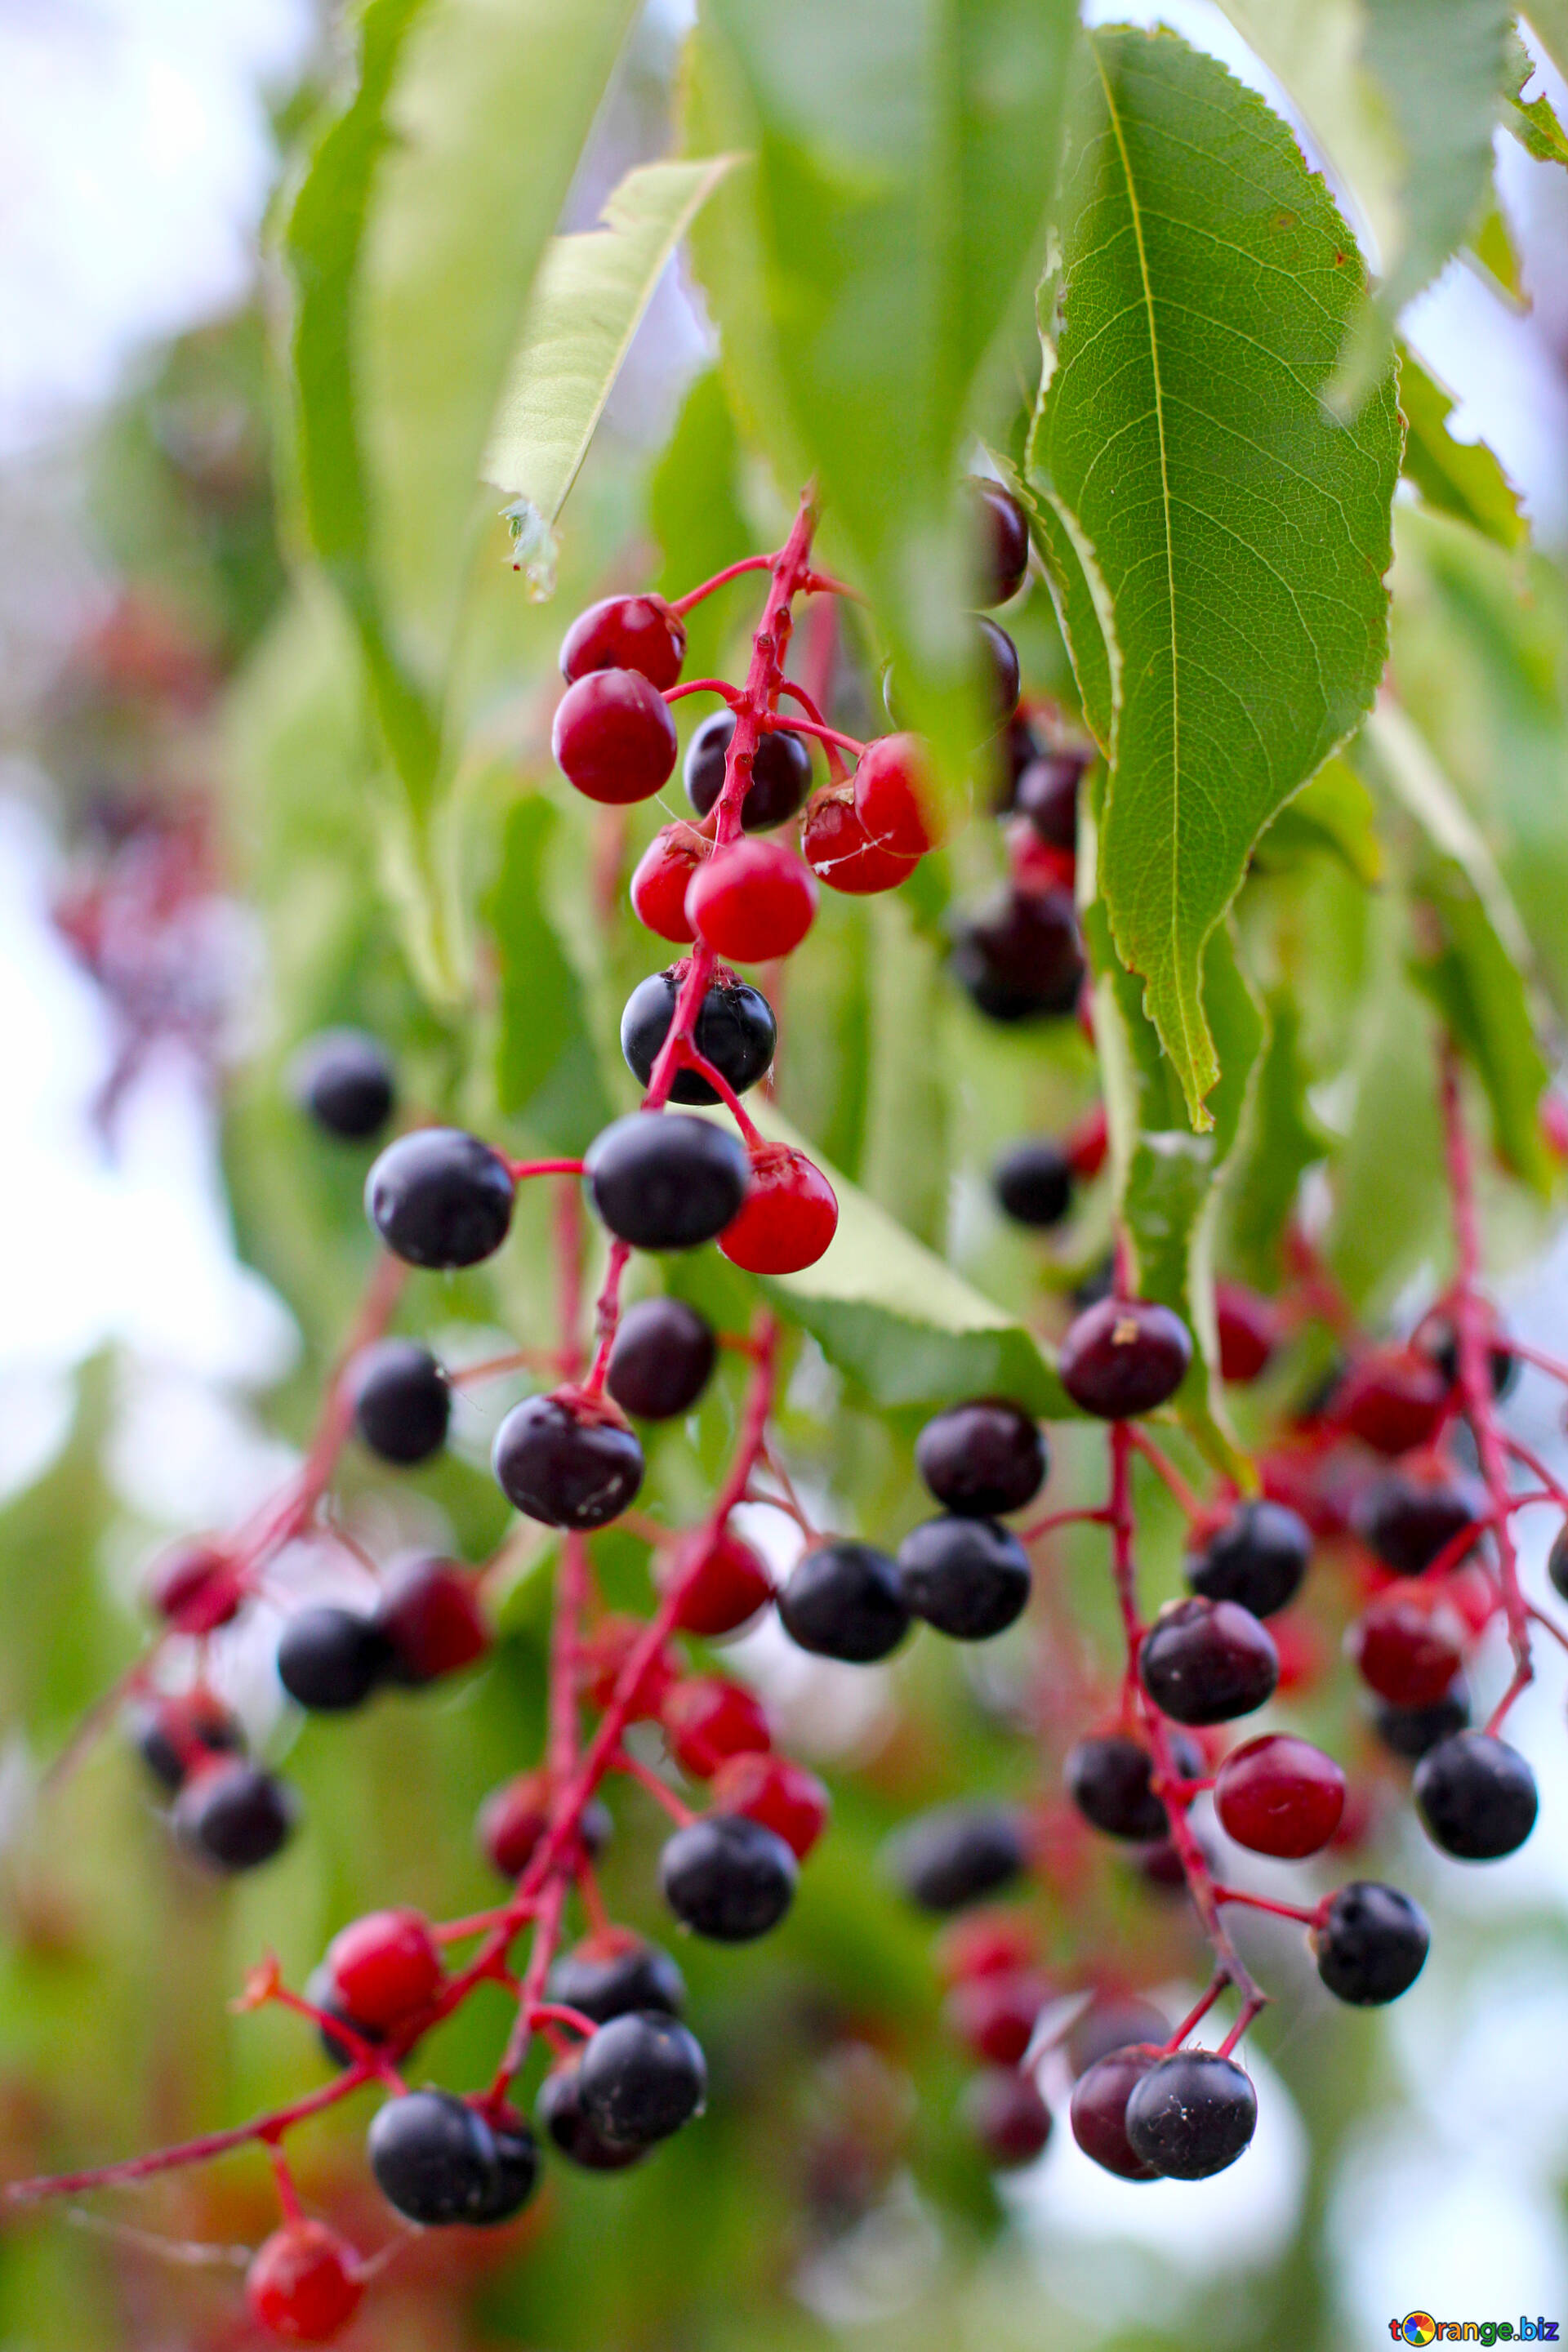 Fruit tree images hd